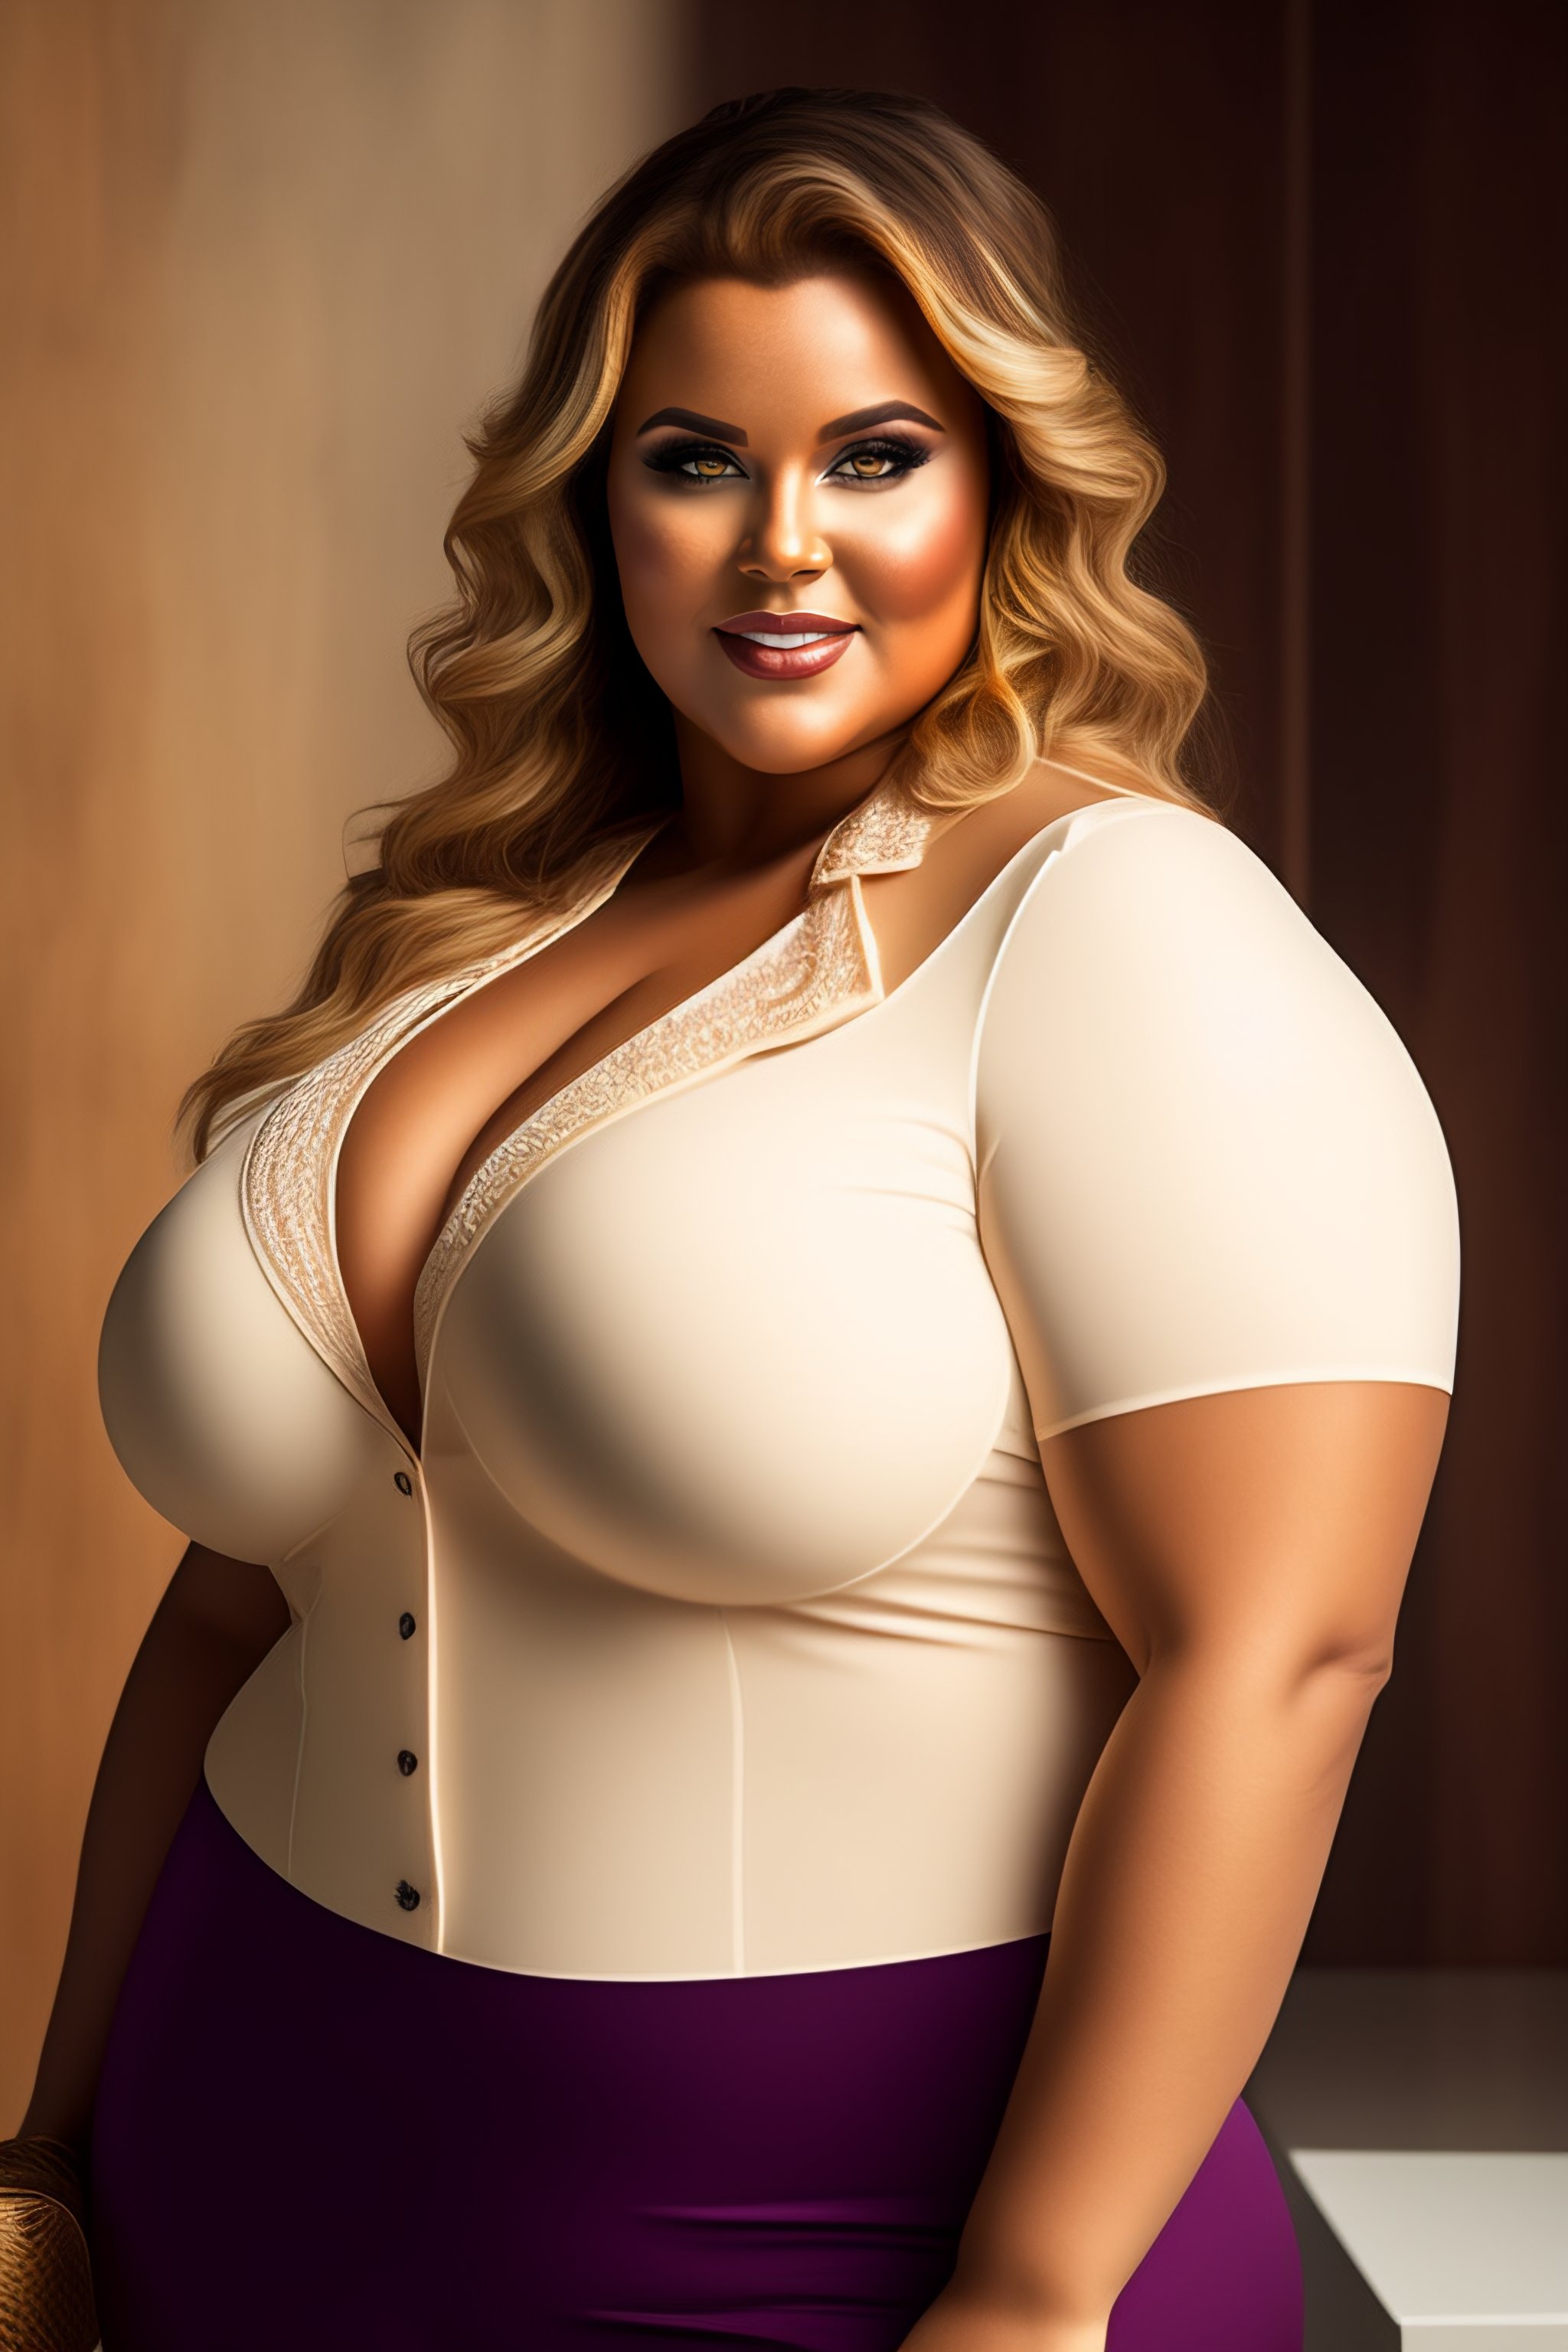 Lexica - Full-figured shapely Swedish woman wearing a low cut and revealing  shirt, serving food